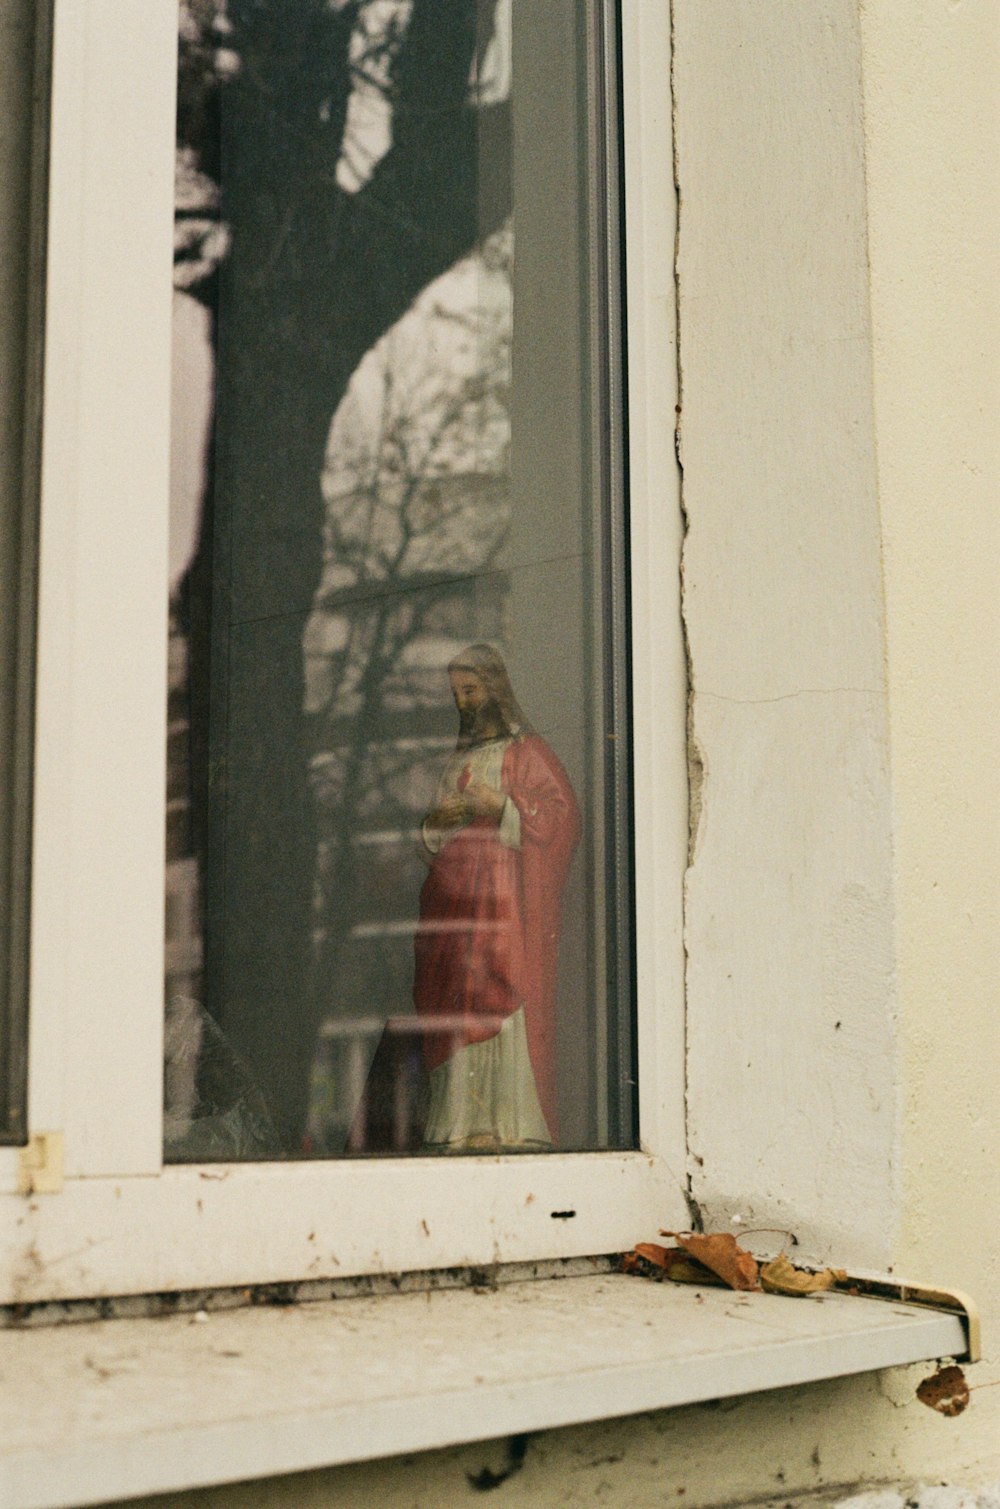 a statue of a person in a red coat is seen through a window